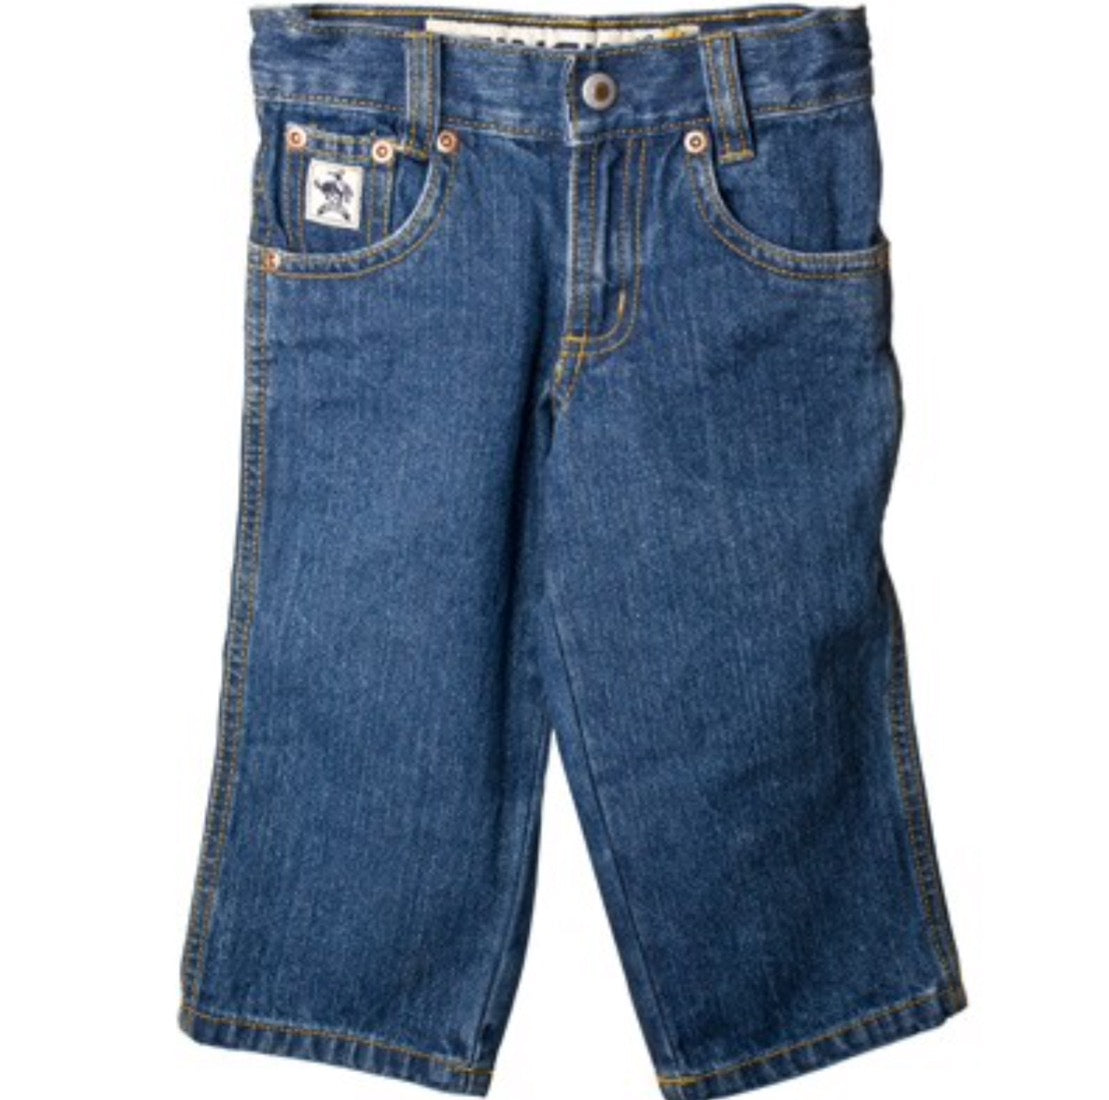 Cinch Toddlers Original Fit Jeans